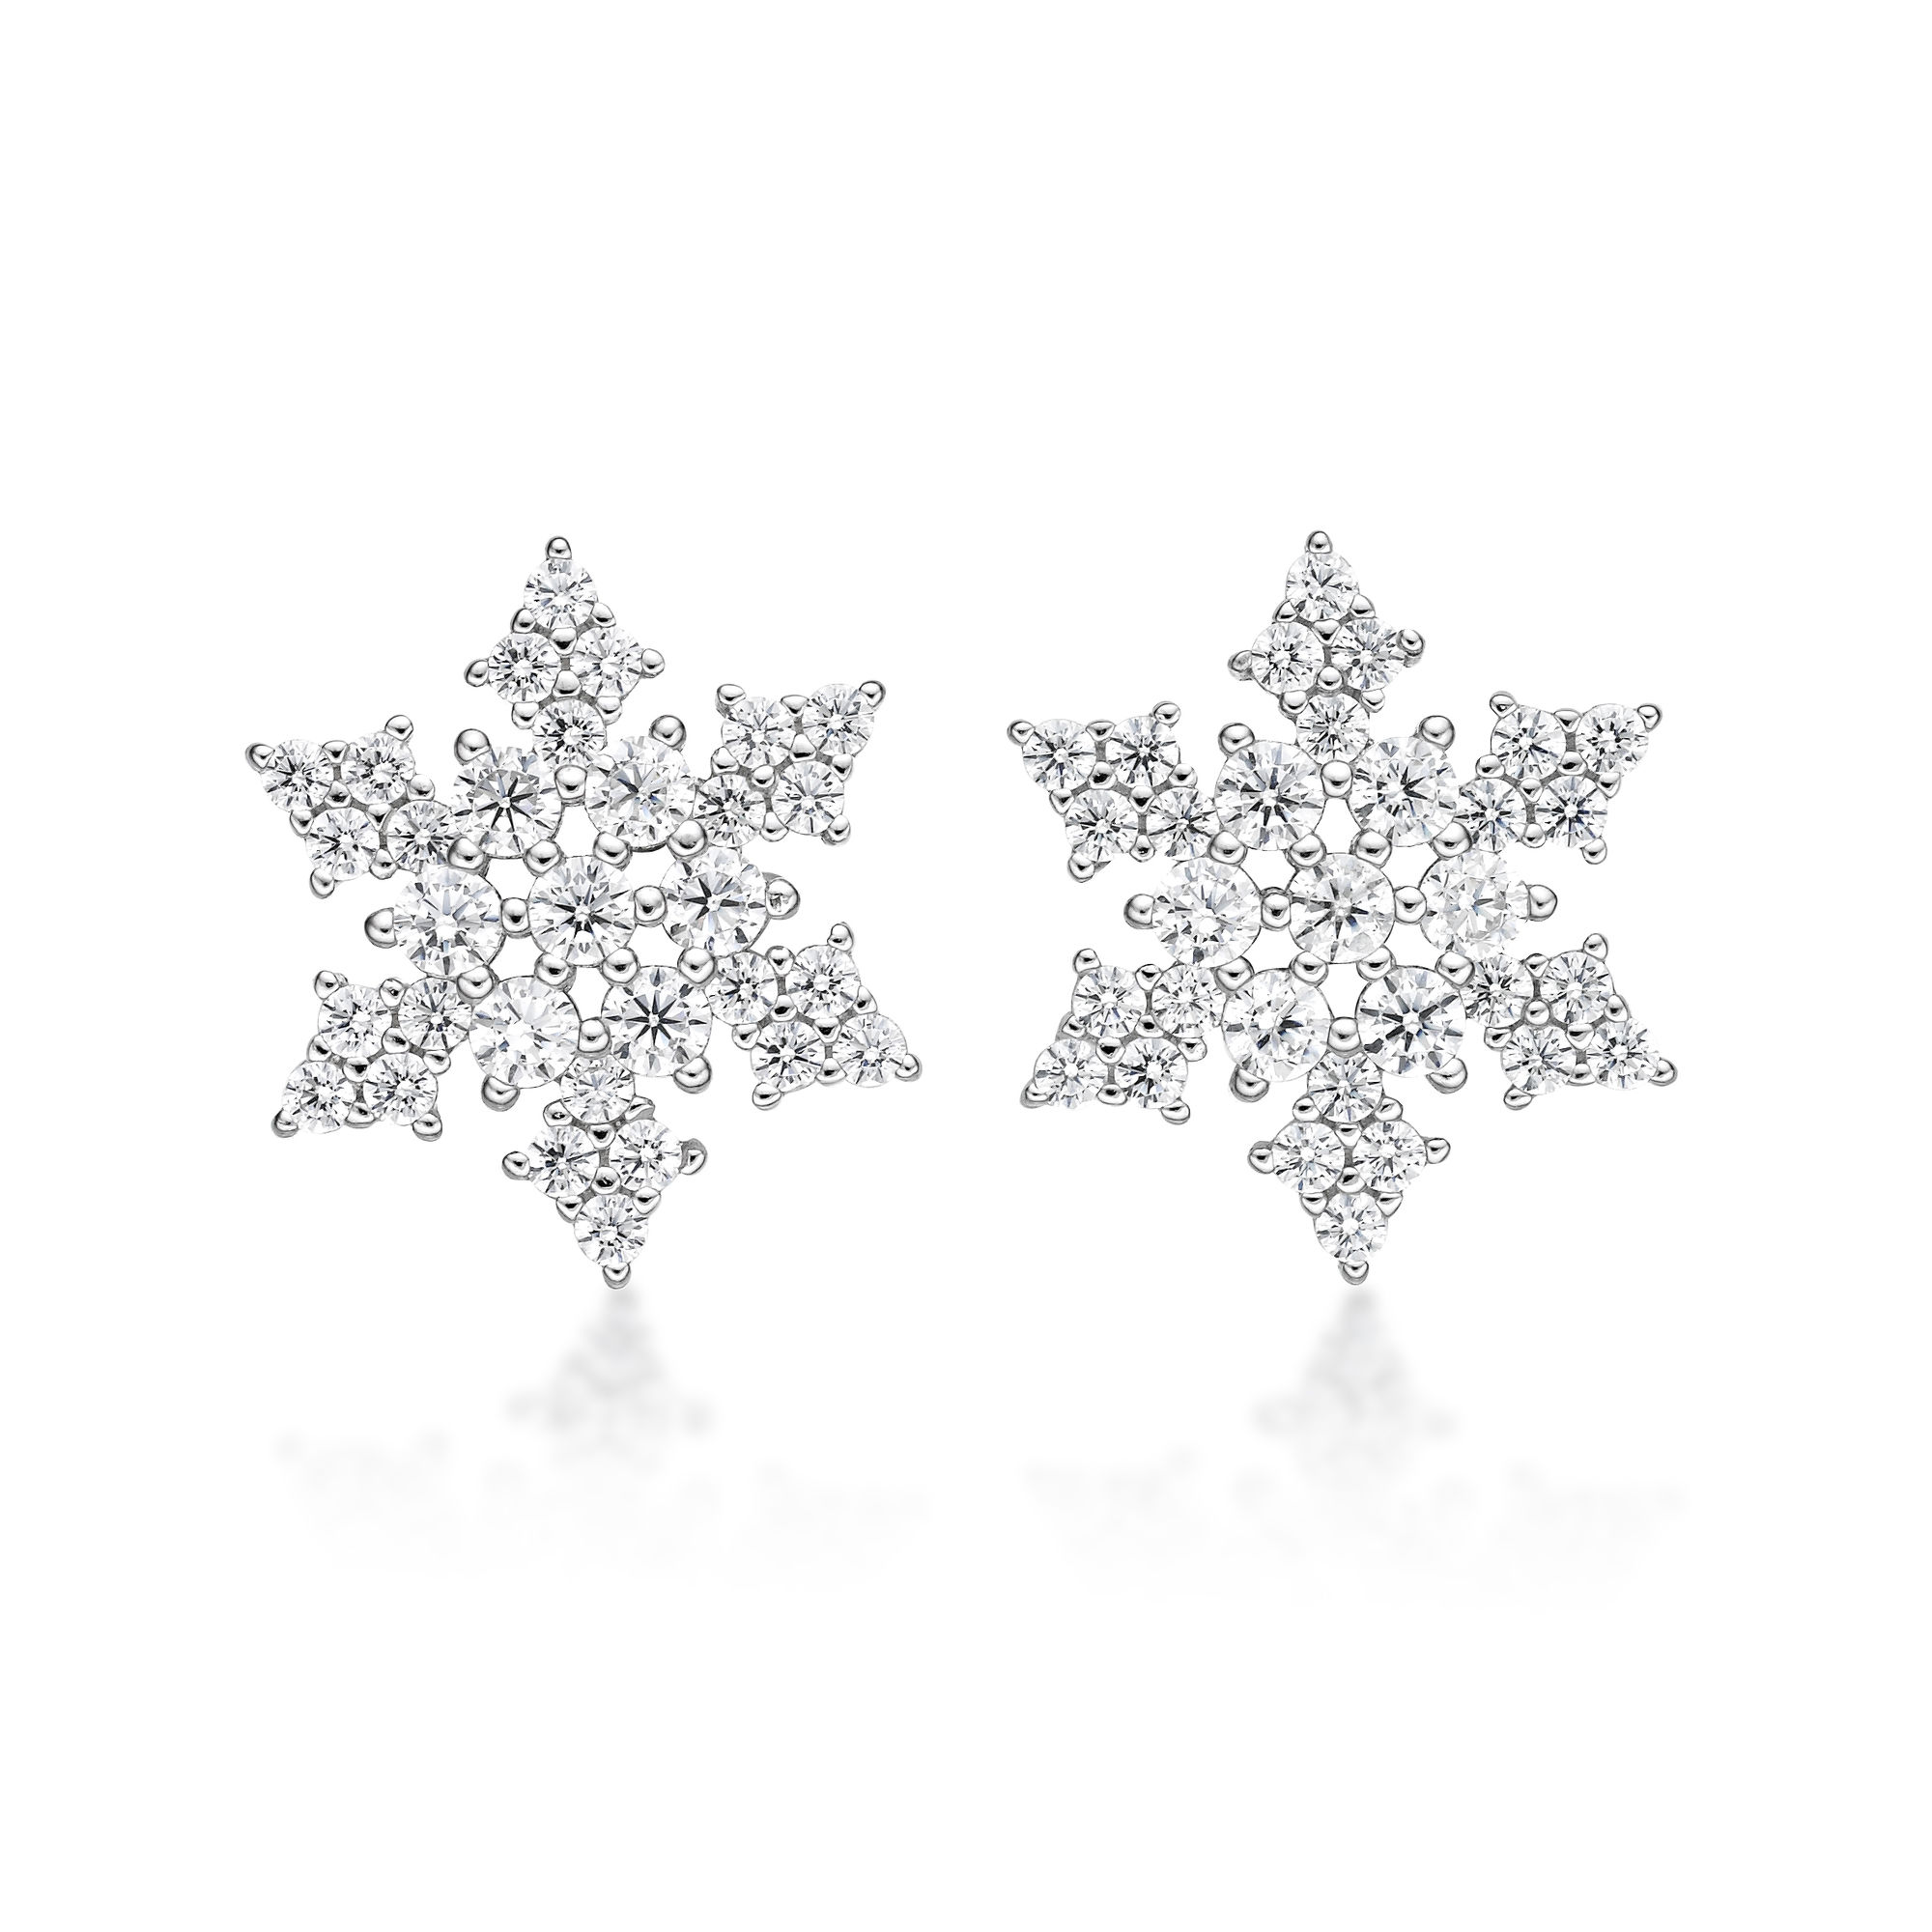 Women's Snowflake Stud Earrings with Friction Post Back, 925 Sterling Silver, Cubic Zirconia, 13 MM - Flurry | Lavari Jewelers